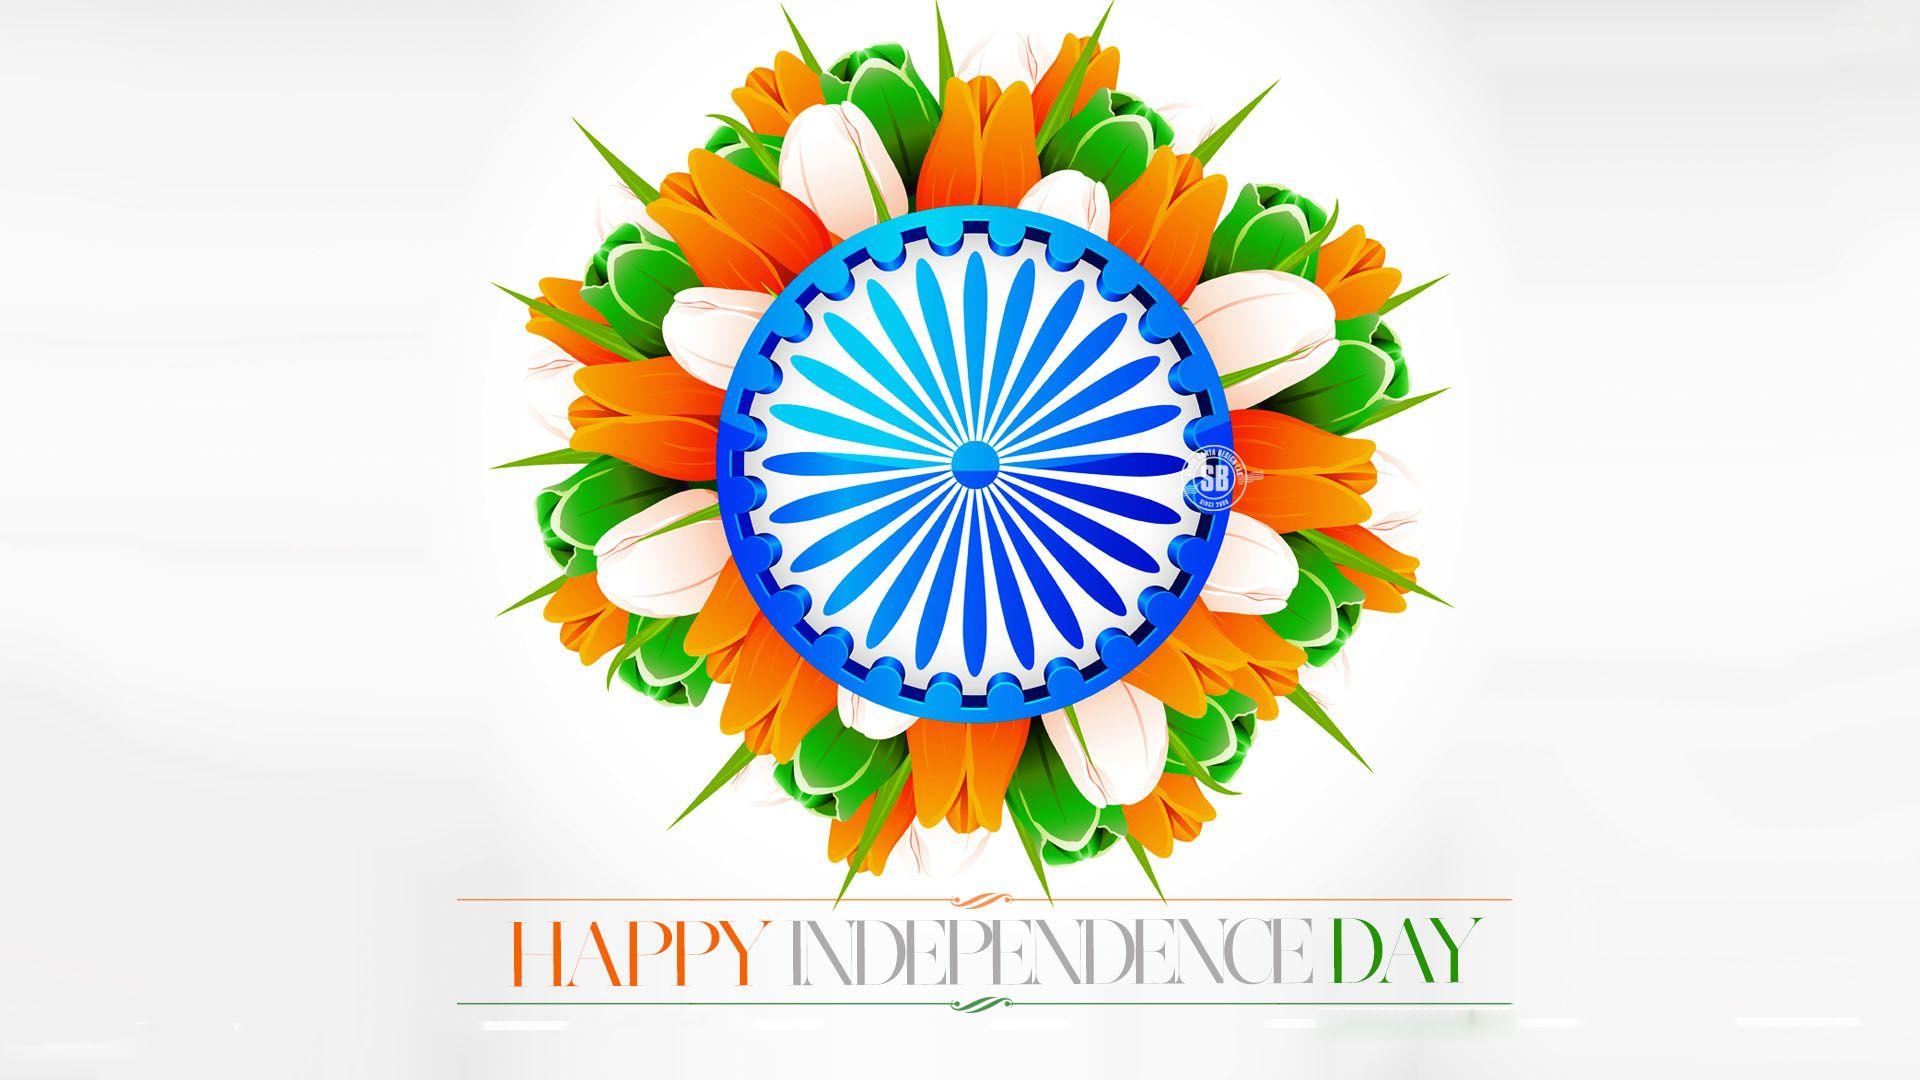 15th August Wallpaper For Pc Free Download. Independence day wallpaper, Happy independence day image, Independence day image